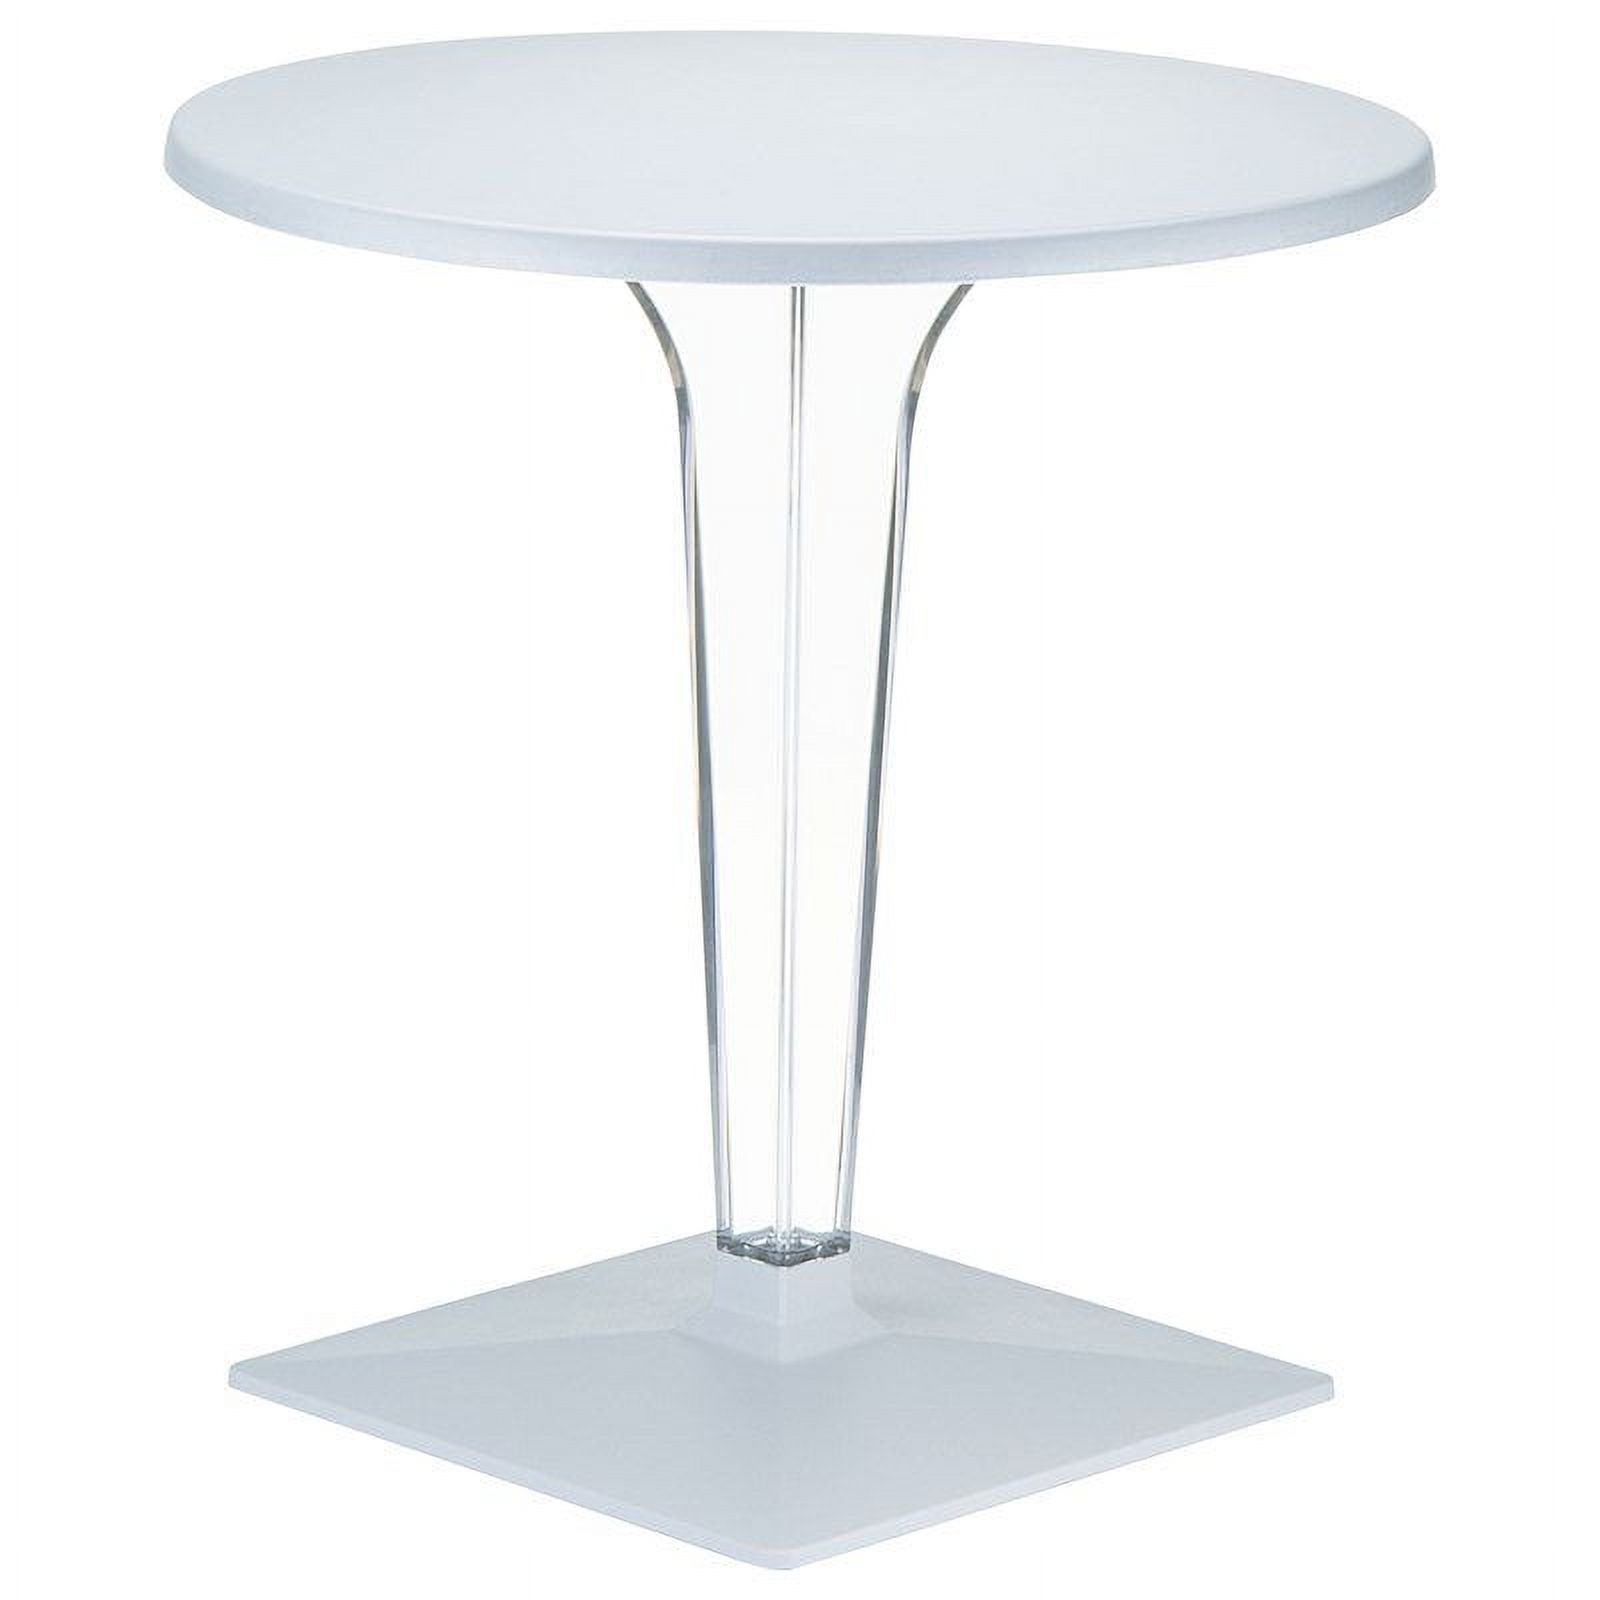 Compamia Ice 24" Round Werzalit Top Patio Dining Table in Silver - image 1 of 11